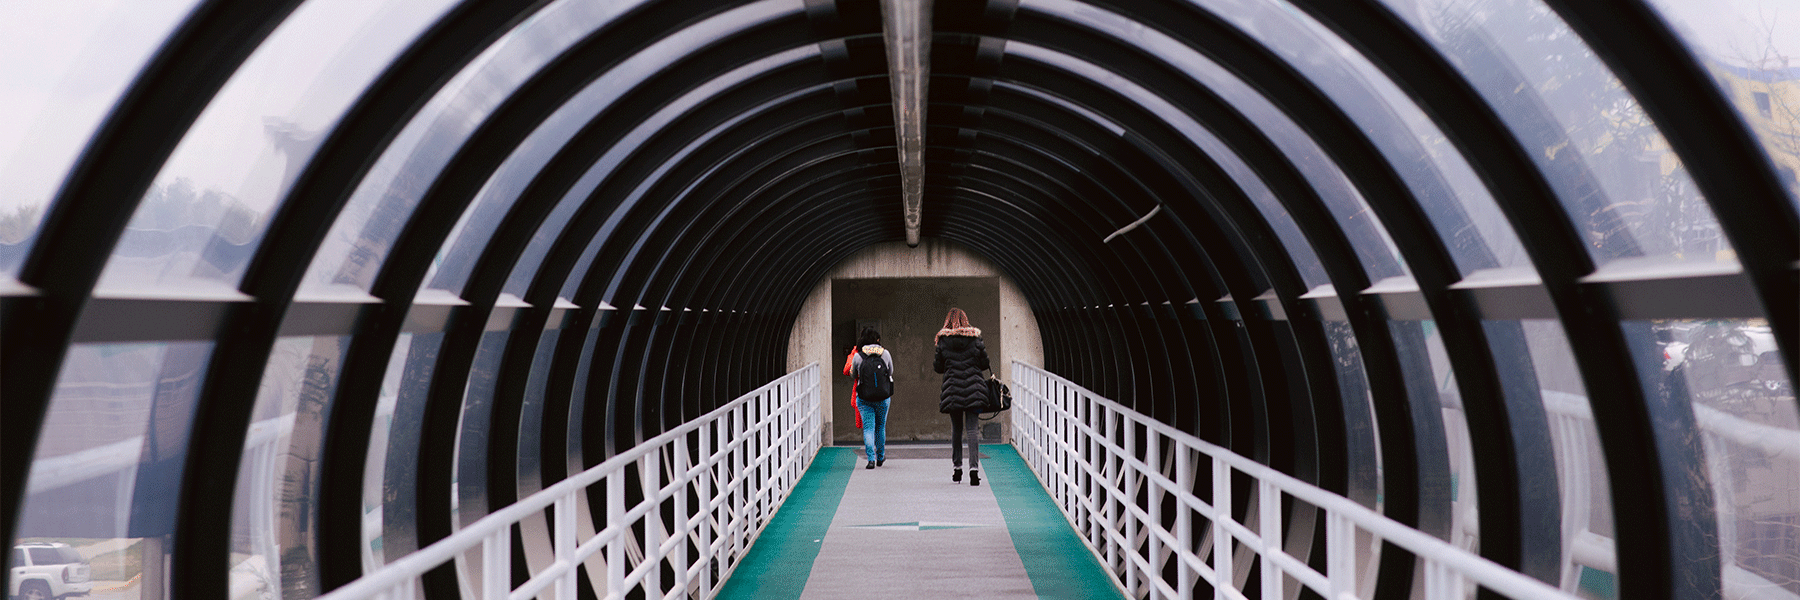 Two students walking through one of the gerbil tunnels.